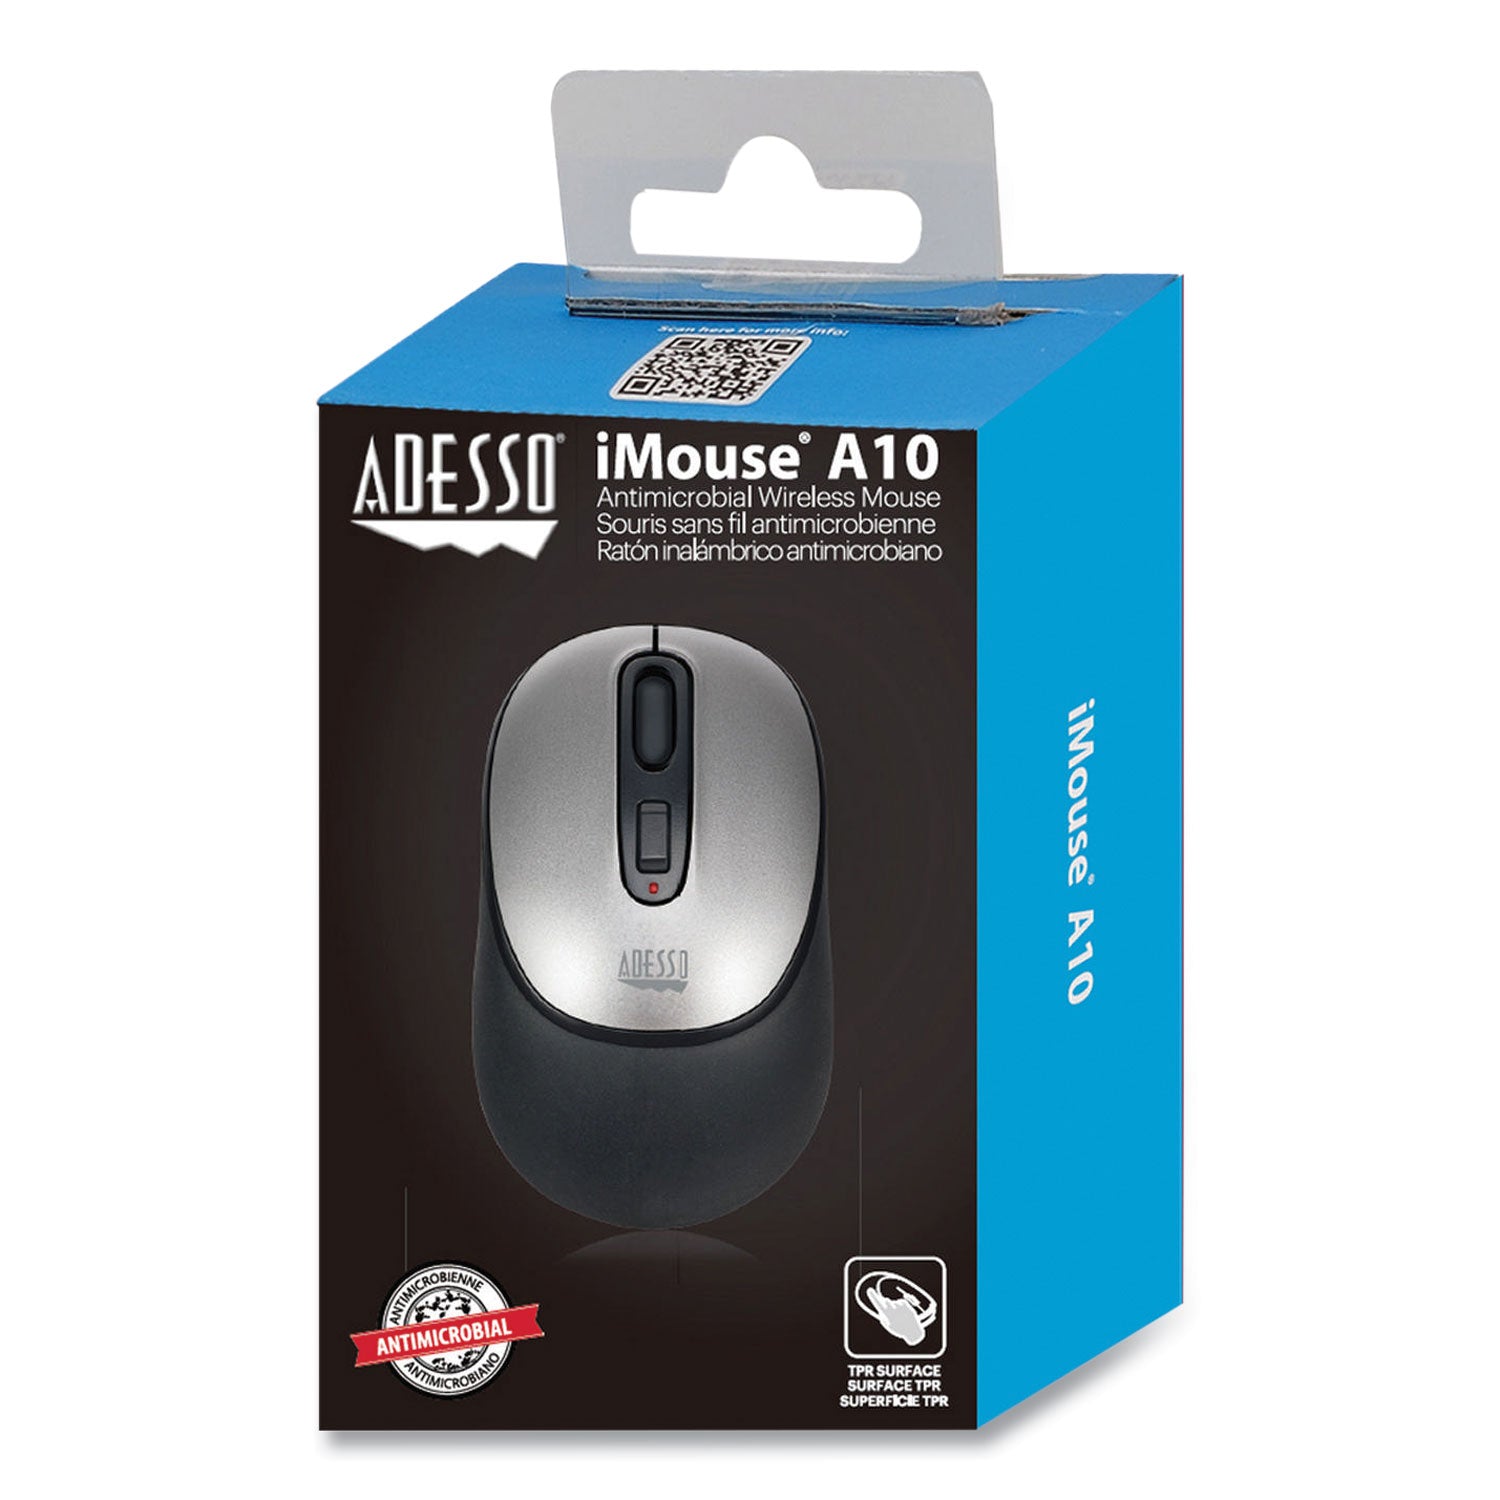 imouse-a10-antimicrobial-wireless-mouse-24-ghz-frequency-30-ft-wireless-range-left-right-hand-use-black-silver_adea10 - 1